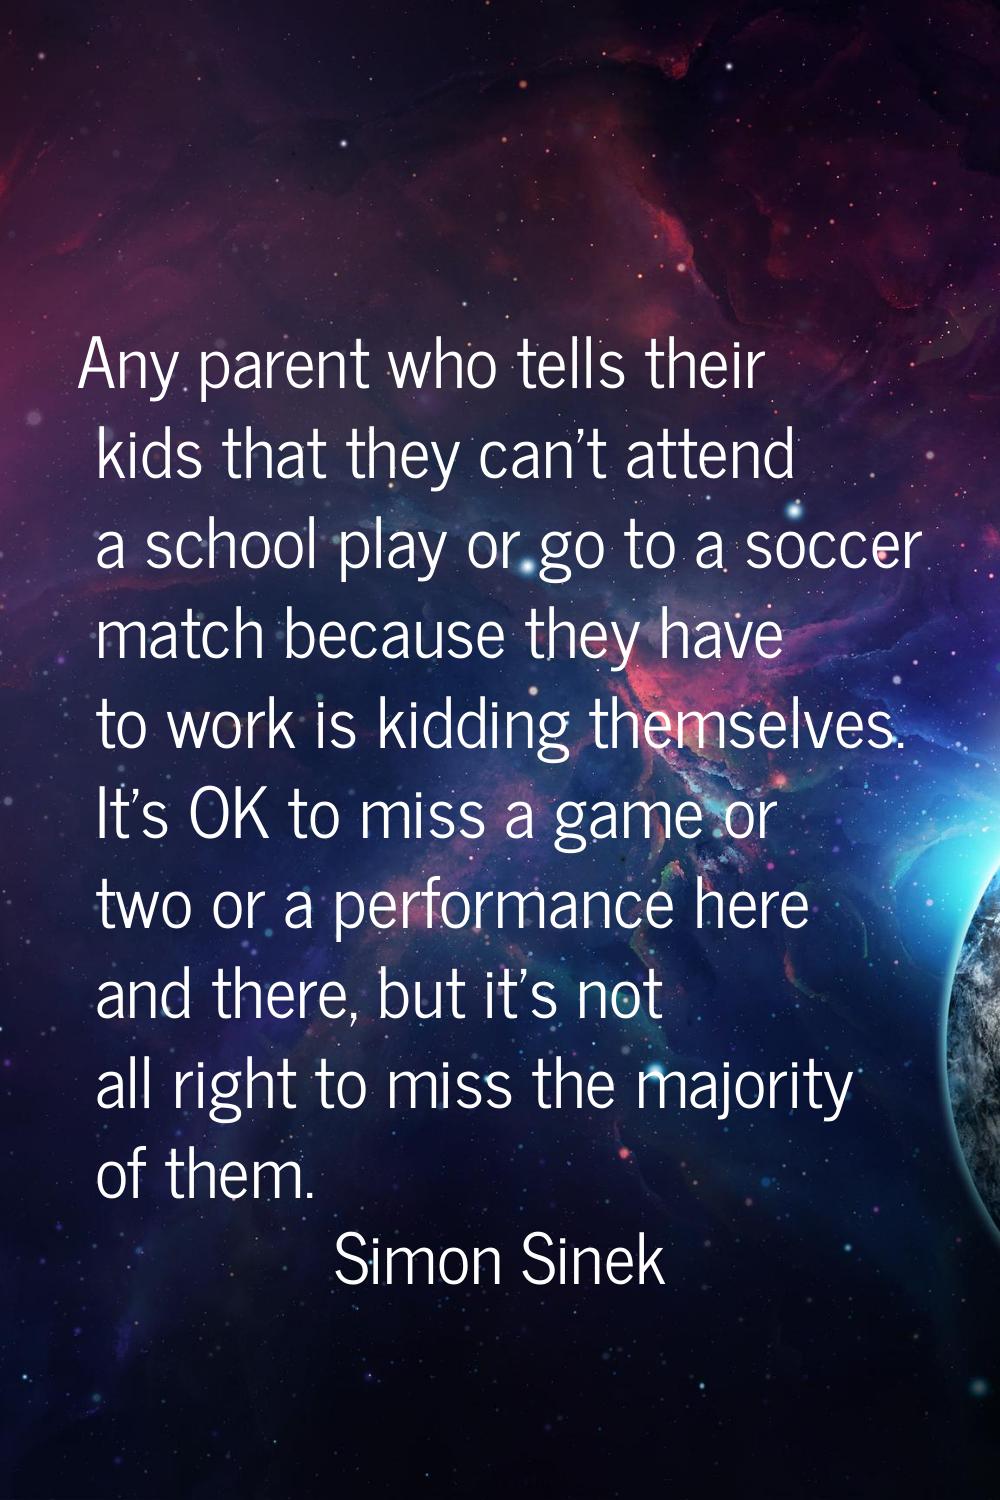 Any parent who tells their kids that they can't attend a school play or go to a soccer match becaus